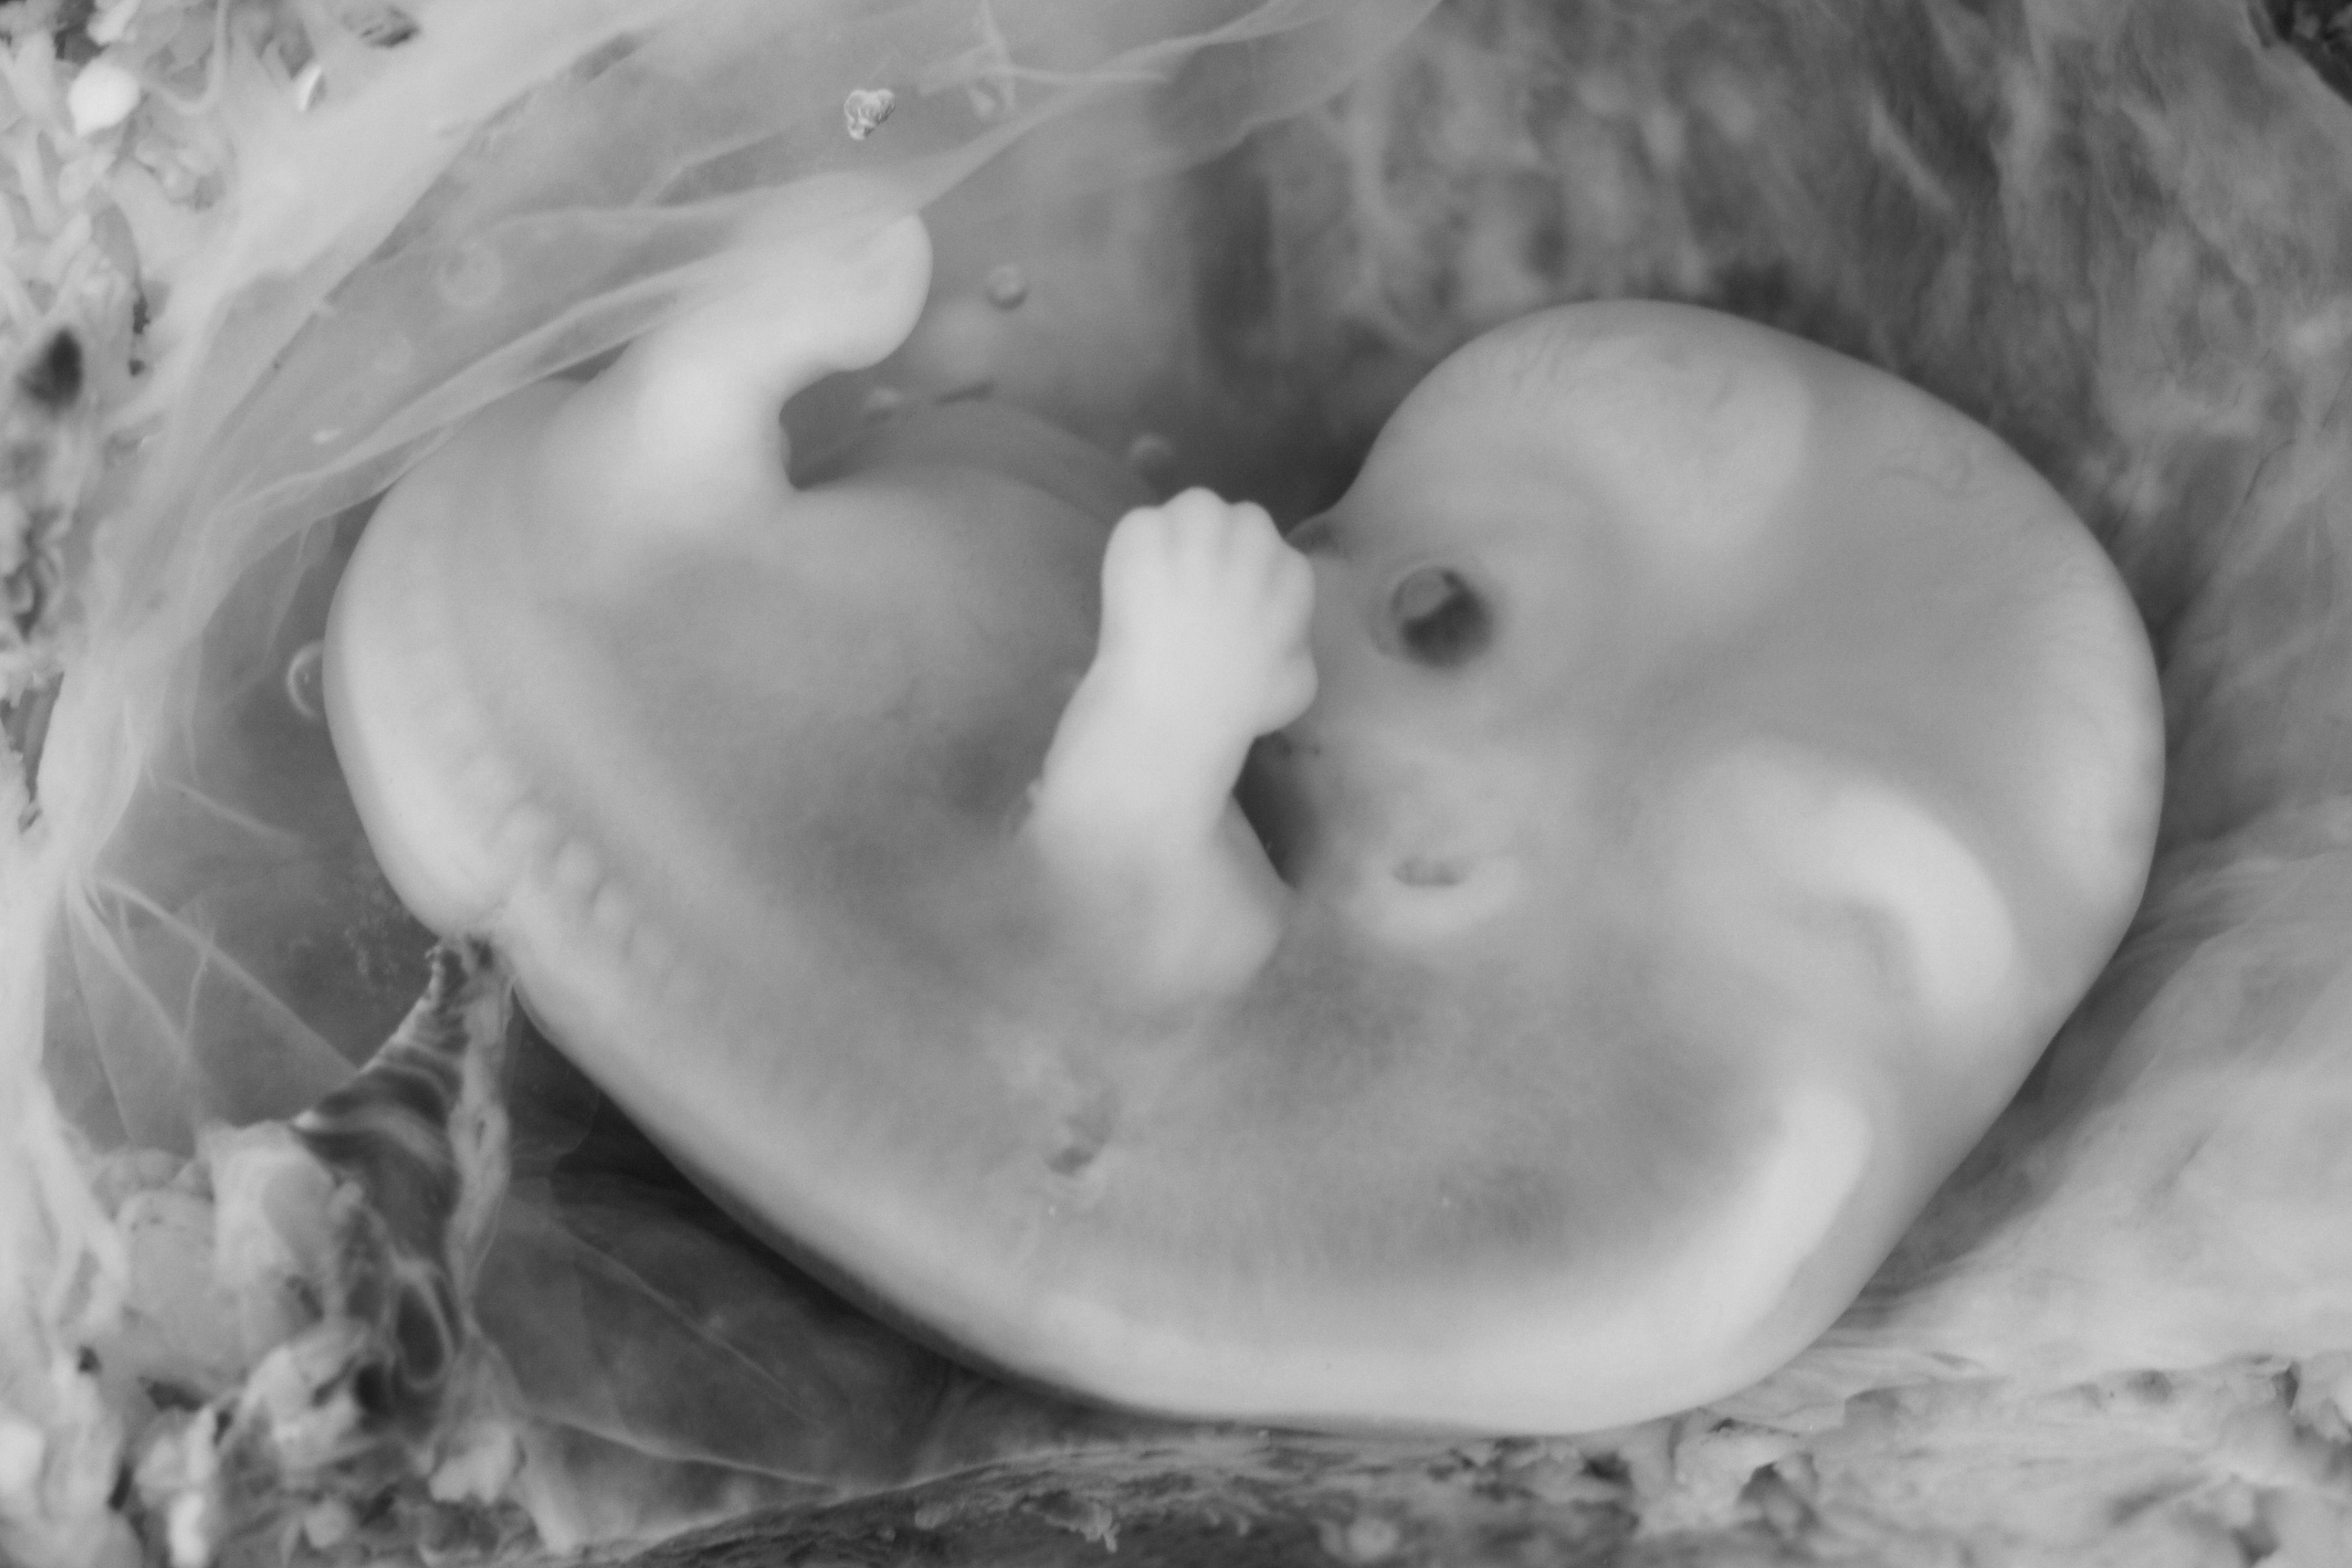 9-Week_Human_Embryo_from_Ectopic_Pregnancy